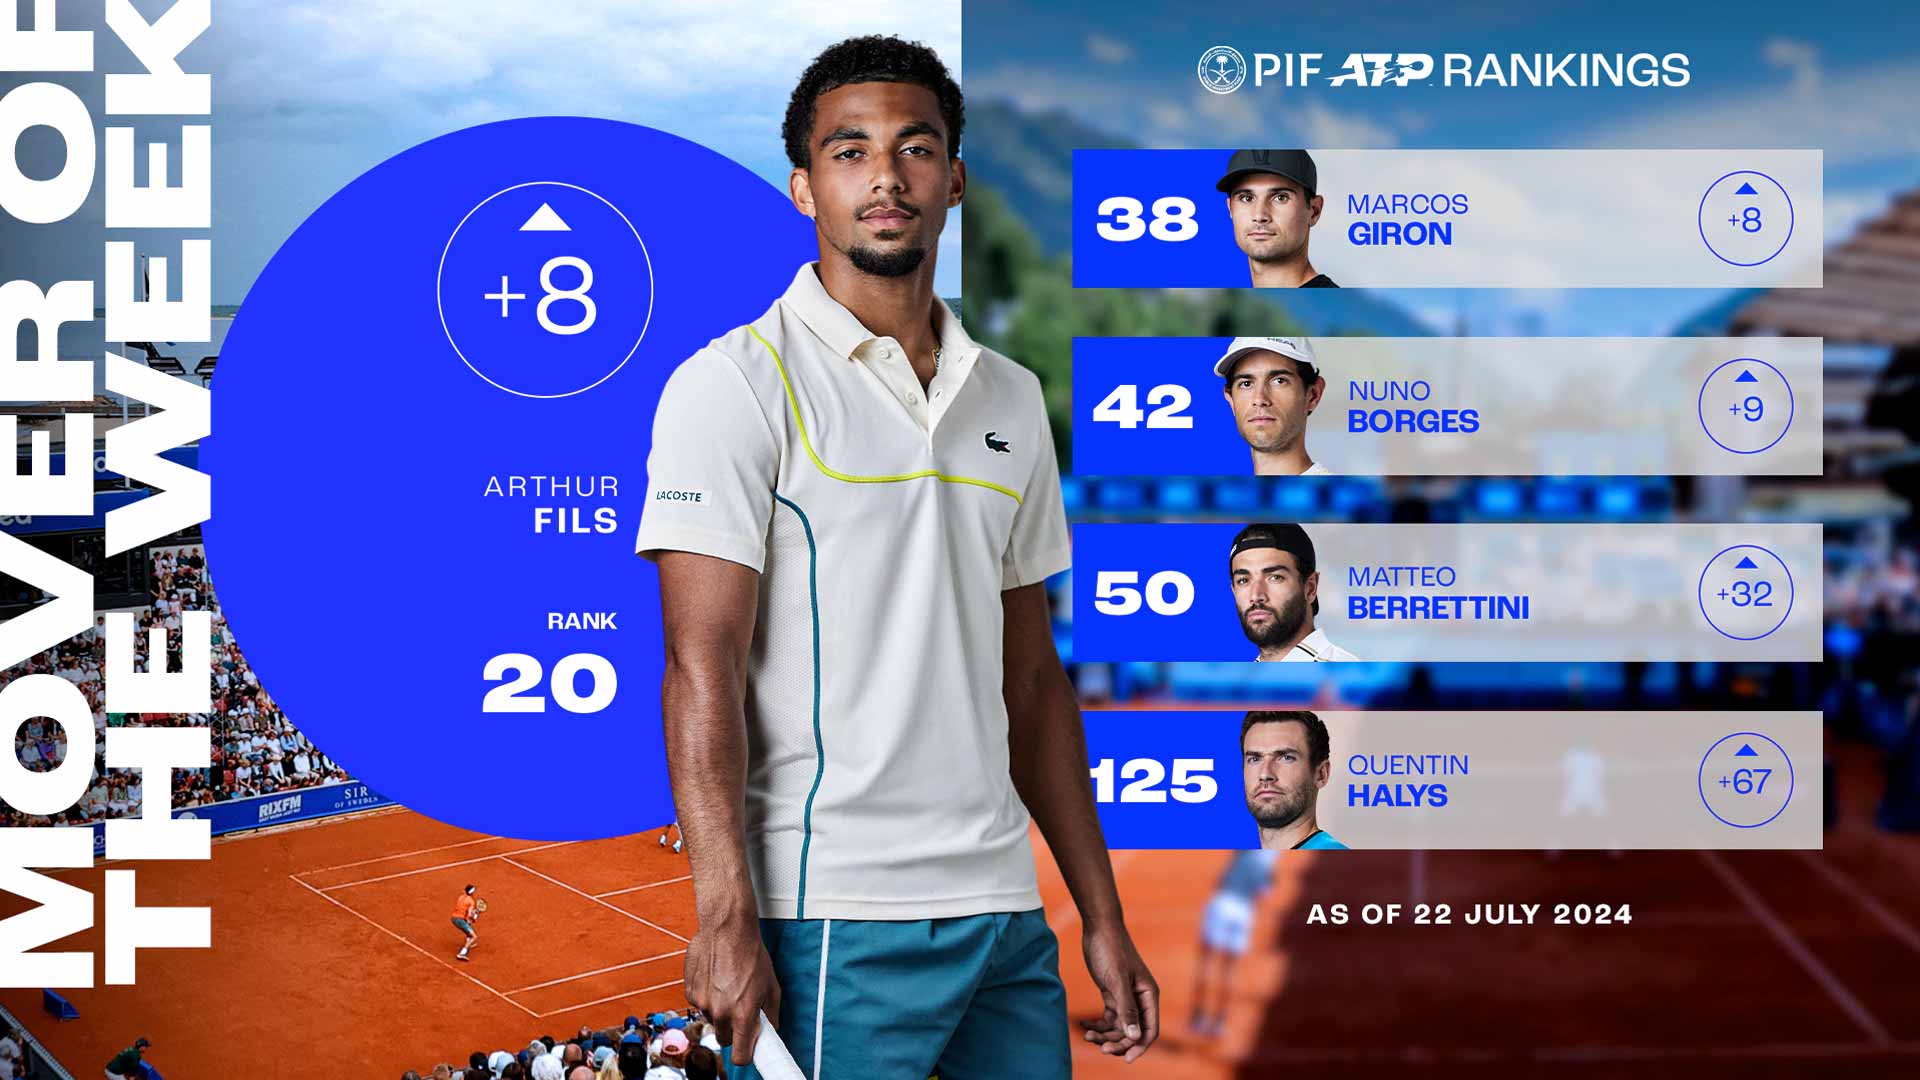 Arthur Fils has risen to a career-high No. 20 in the PIF ATP Rankings after winning the Hamburg title.